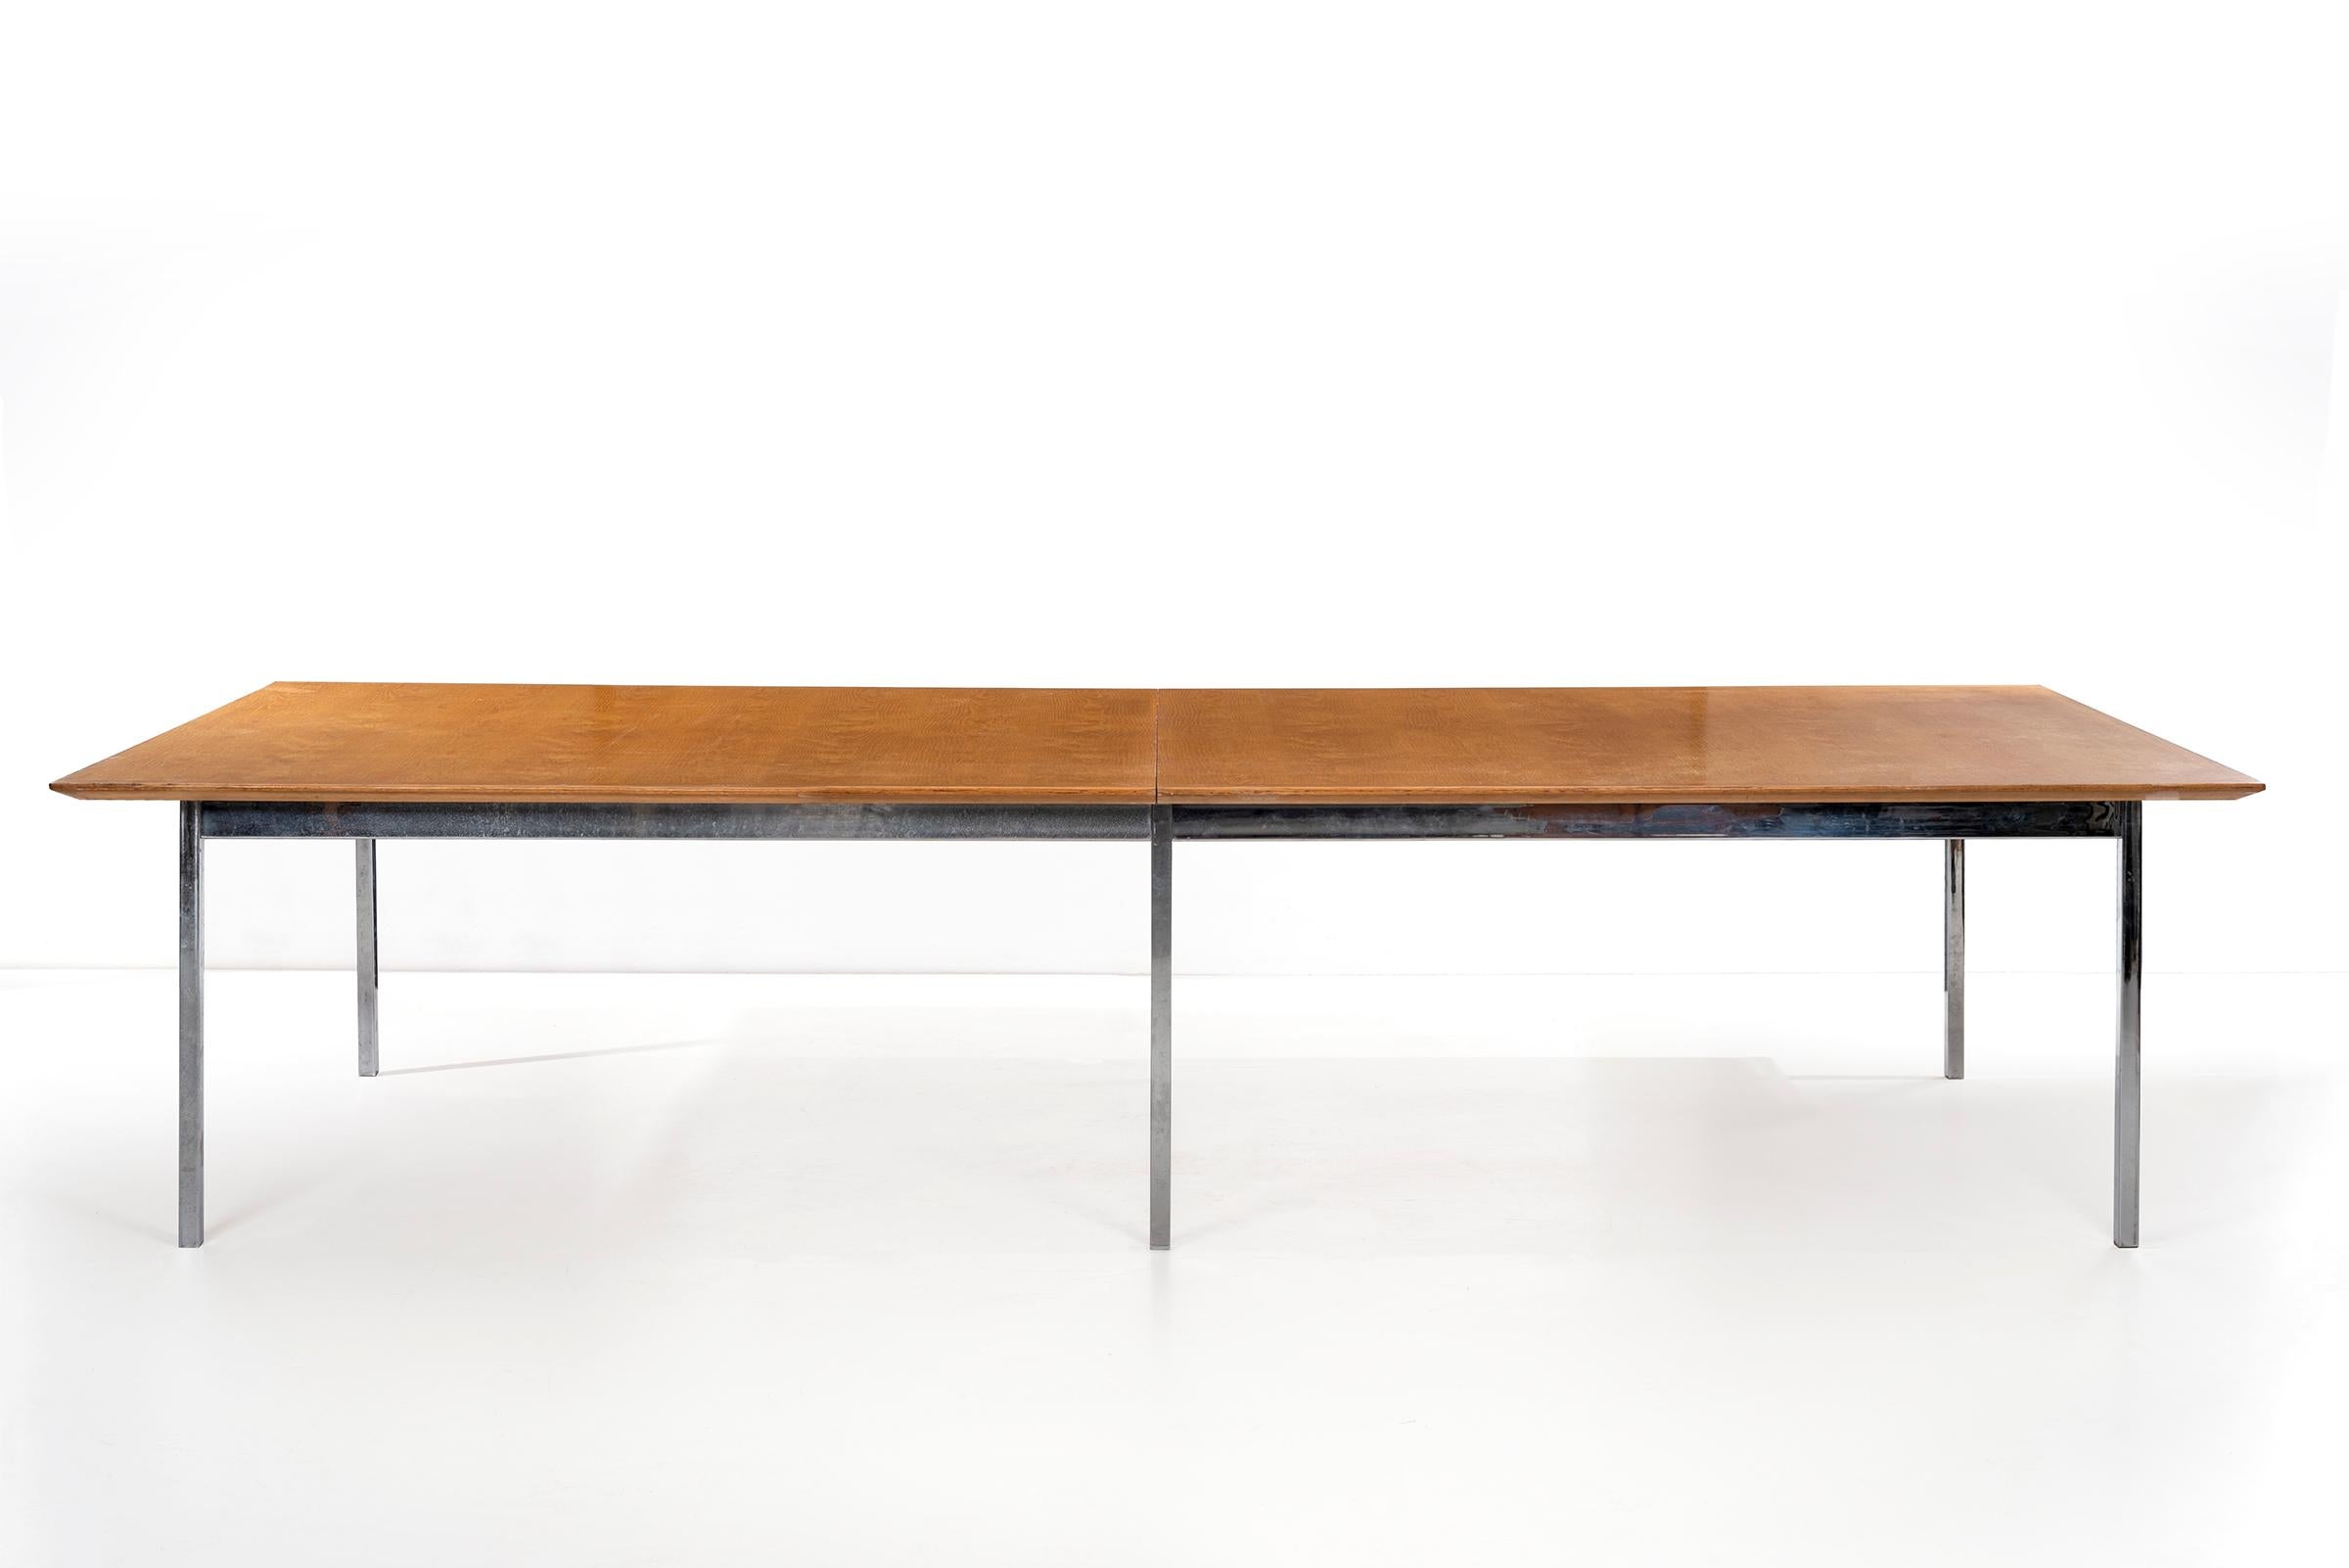 Florence Knoll for Knoll, custom ordered for standard oil in Los Angeles large-scale table, features book-matched bleached oak veneer with classic Knoll beveled edge, square tubular base structure.
Knoll label on underside.